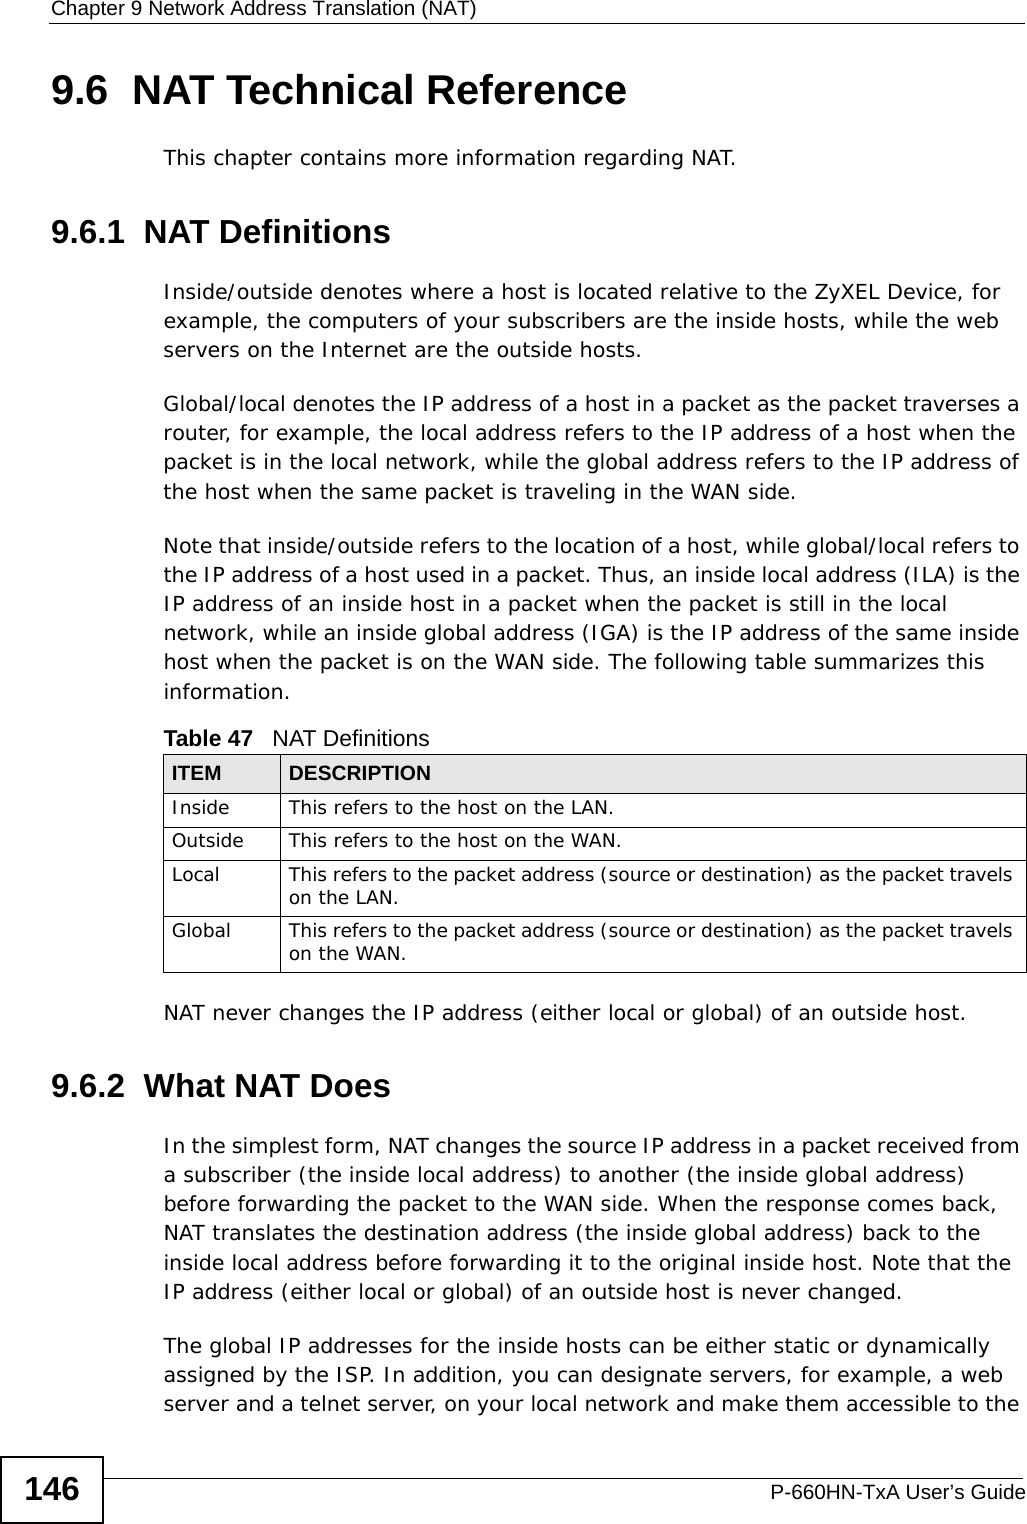 Chapter 9 Network Address Translation (NAT)P-660HN-TxA User’s Guide1469.6  NAT Technical ReferenceThis chapter contains more information regarding NAT.9.6.1  NAT DefinitionsInside/outside denotes where a host is located relative to the ZyXEL Device, for example, the computers of your subscribers are the inside hosts, while the web servers on the Internet are the outside hosts. Global/local denotes the IP address of a host in a packet as the packet traverses a router, for example, the local address refers to the IP address of a host when the packet is in the local network, while the global address refers to the IP address of the host when the same packet is traveling in the WAN side. Note that inside/outside refers to the location of a host, while global/local refers to the IP address of a host used in a packet. Thus, an inside local address (ILA) is the IP address of an inside host in a packet when the packet is still in the local network, while an inside global address (IGA) is the IP address of the same inside host when the packet is on the WAN side. The following table summarizes this information.NAT never changes the IP address (either local or global) of an outside host.9.6.2  What NAT DoesIn the simplest form, NAT changes the source IP address in a packet received from a subscriber (the inside local address) to another (the inside global address) before forwarding the packet to the WAN side. When the response comes back, NAT translates the destination address (the inside global address) back to the inside local address before forwarding it to the original inside host. Note that the IP address (either local or global) of an outside host is never changed.The global IP addresses for the inside hosts can be either static or dynamically assigned by the ISP. In addition, you can designate servers, for example, a web server and a telnet server, on your local network and make them accessible to the Table 47   NAT DefinitionsITEM DESCRIPTIONInside This refers to the host on the LAN.Outside This refers to the host on the WAN.Local This refers to the packet address (source or destination) as the packet travels on the LAN.Global This refers to the packet address (source or destination) as the packet travels on the WAN.